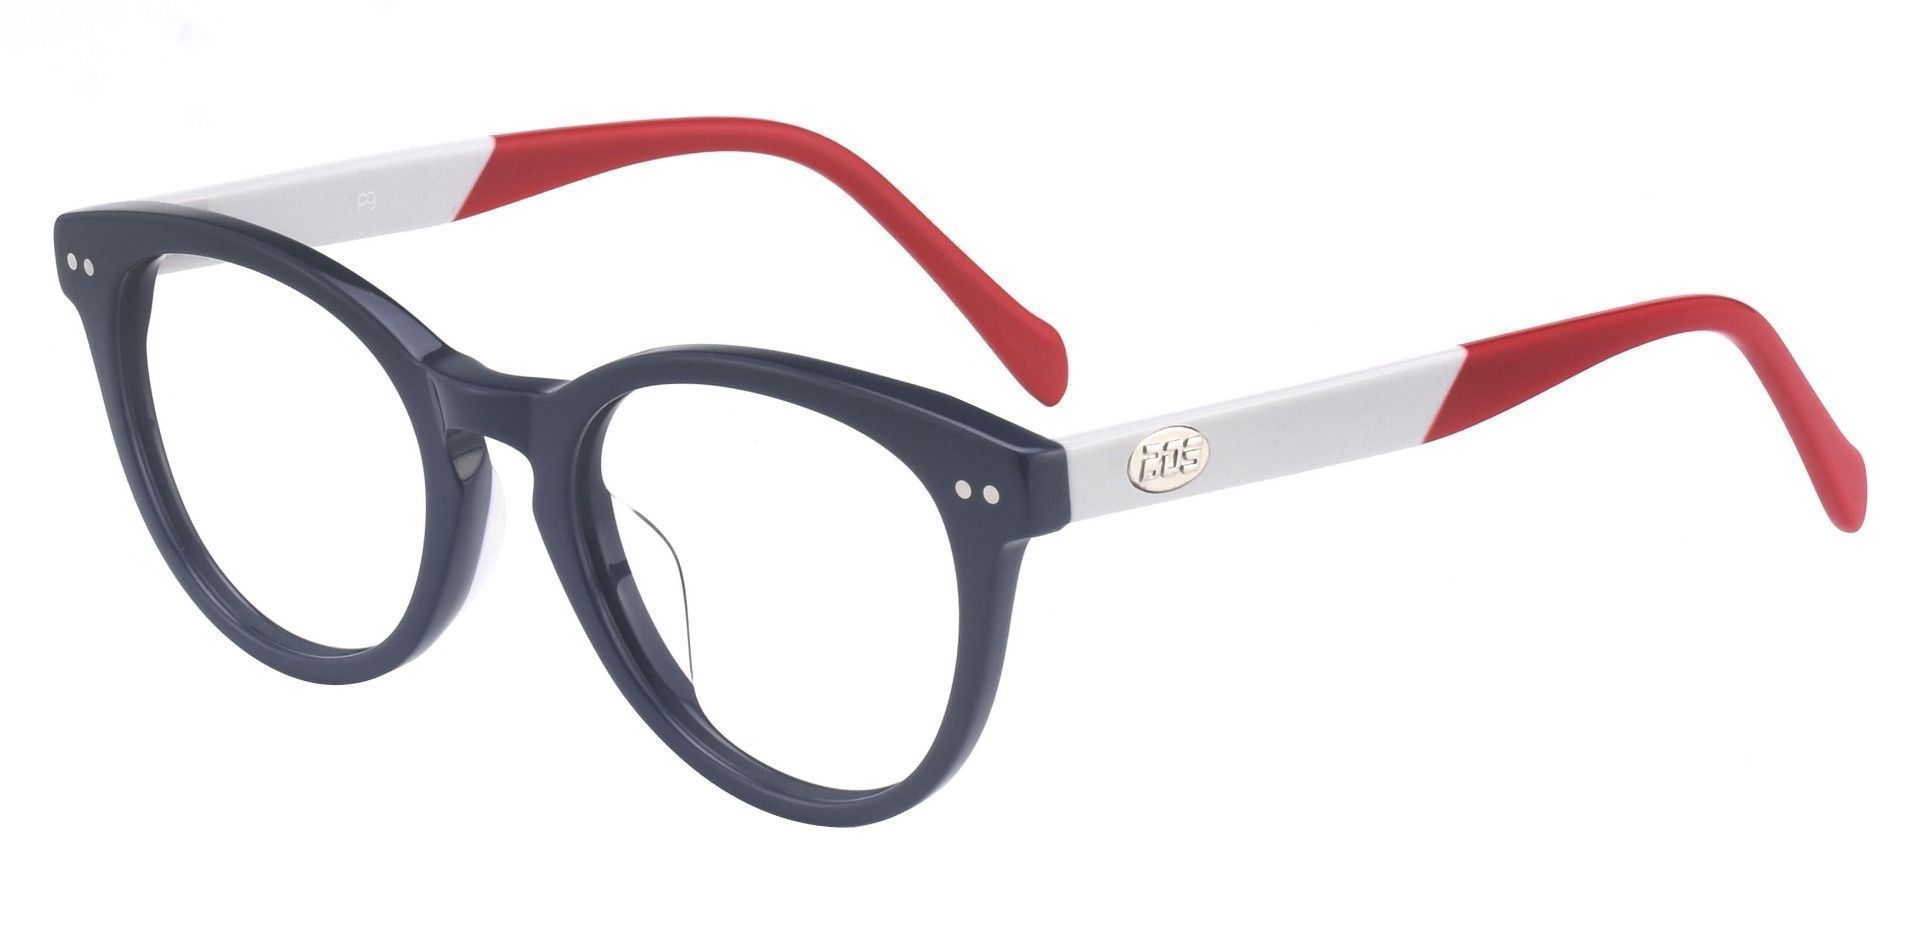 Common Oval Prescription Glasses - The Frame Is Blue And Red